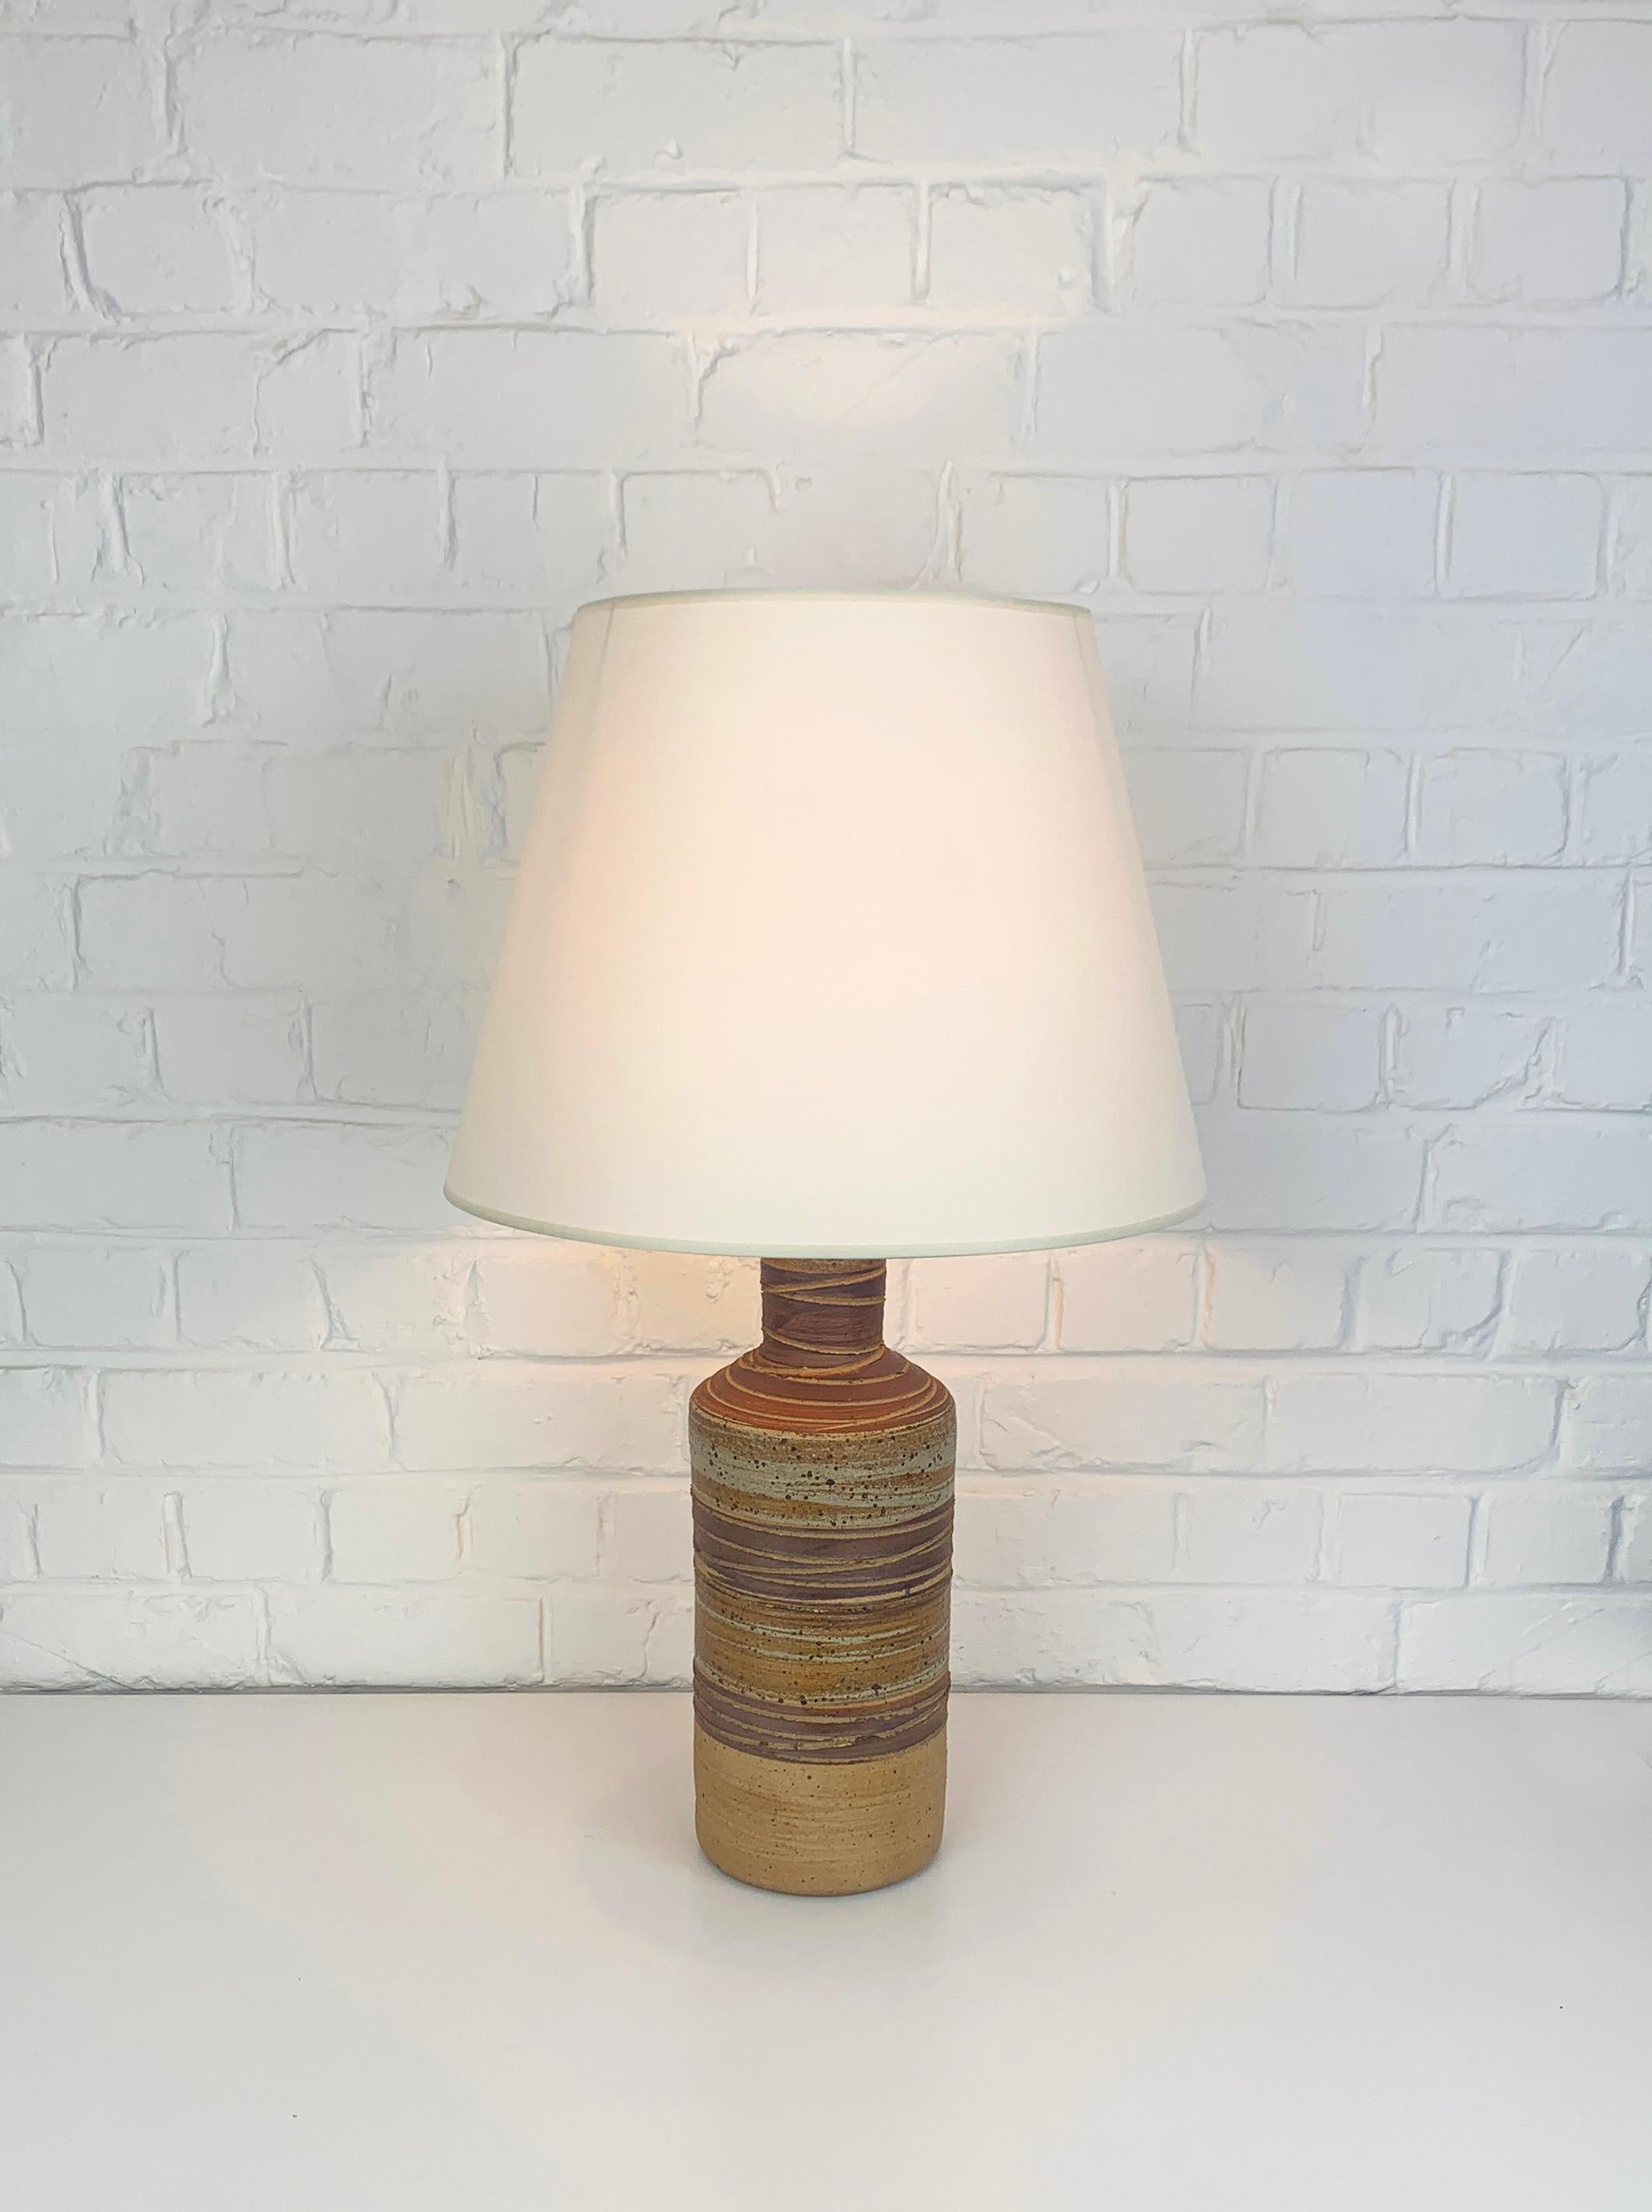 Tall Ceramic table lamp Tue Poulsen Denmark stoneware natural brown earth colors In Good Condition For Sale In Vorst, BE